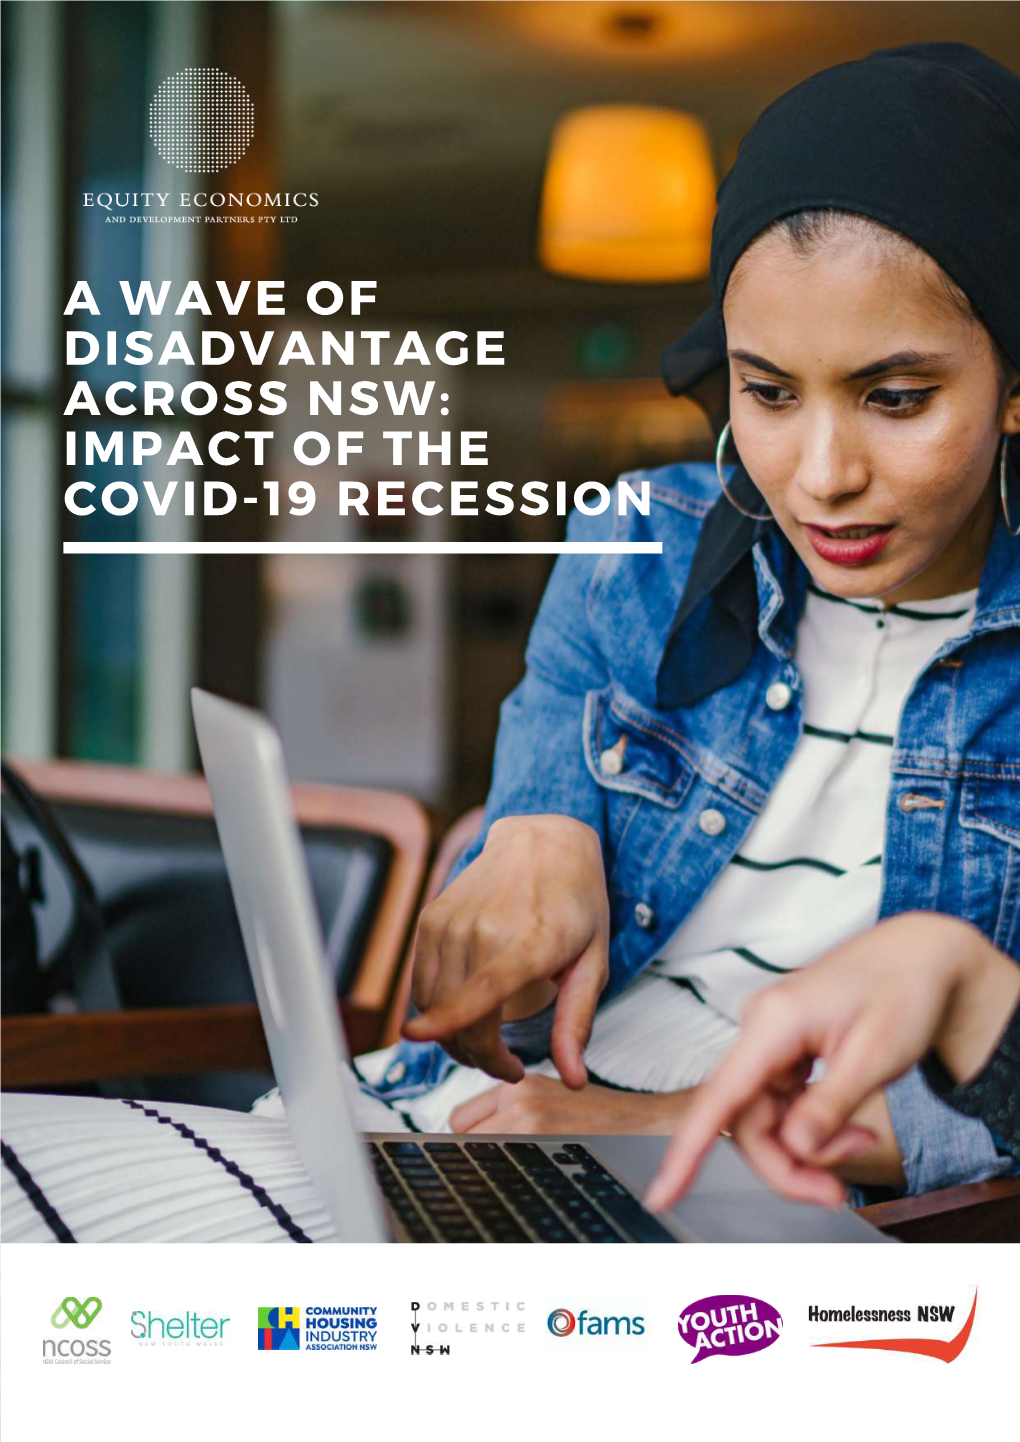 A Wave of Disadvantage Across Nsw Impact of the Covid-19 Recession